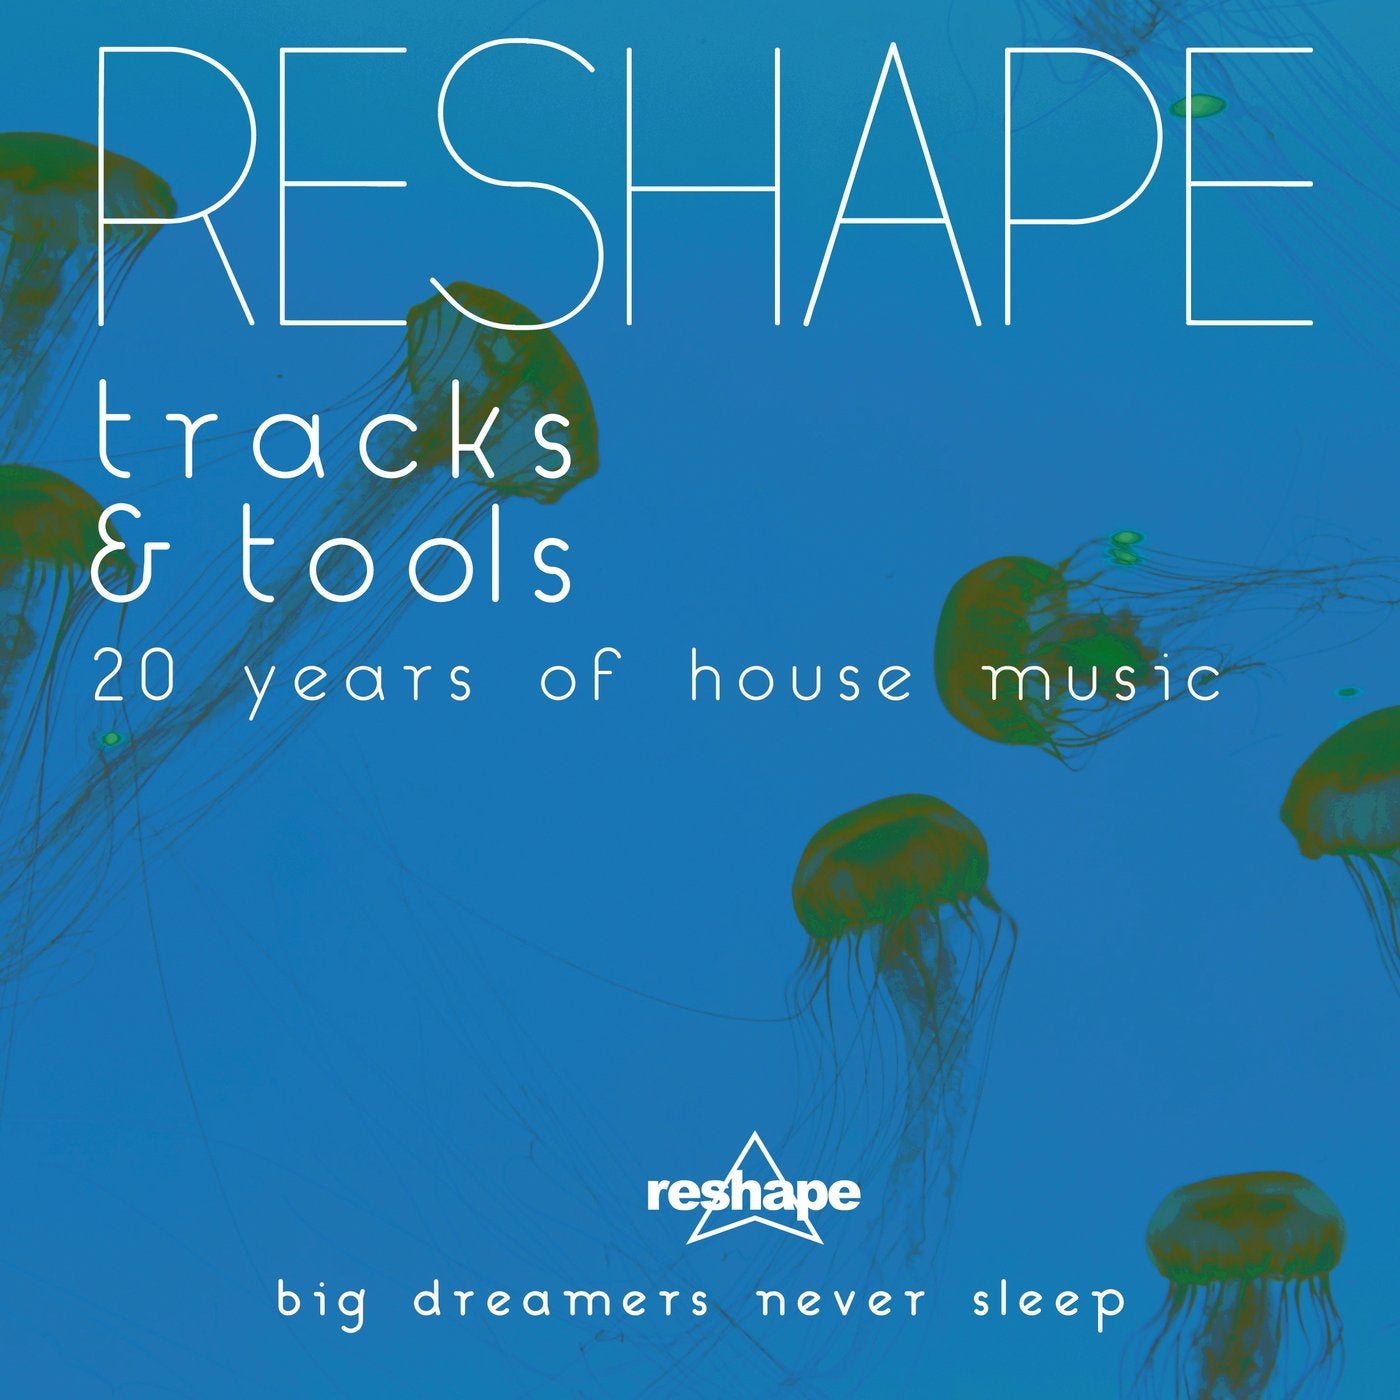 Tracks And Tools - 20 Years Of House Music